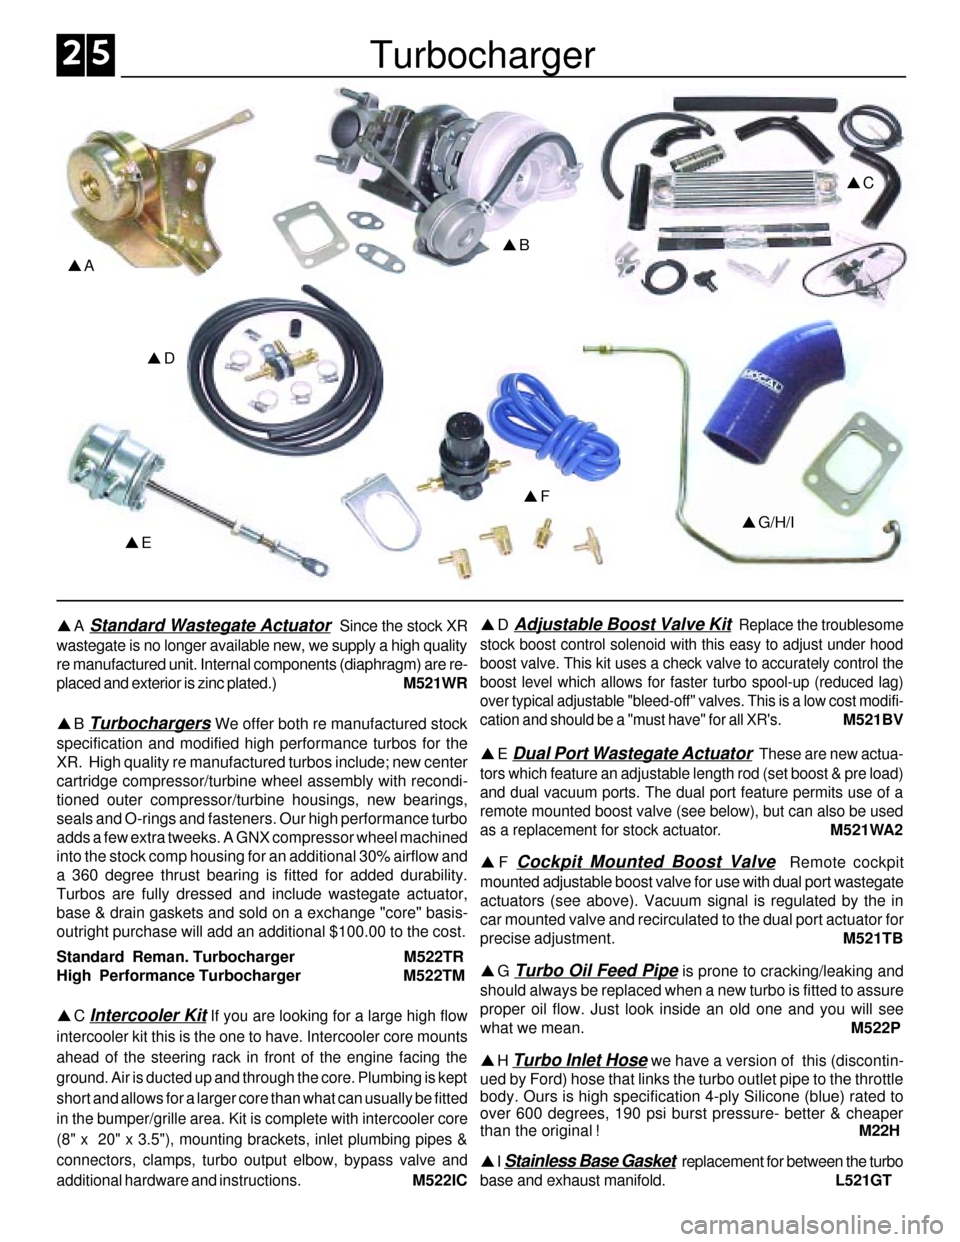 FORD SIERRA 1993 2.G XR4 Workshop Manual Turbocharger
pC
pG/H/I
pF
pD
pA
pB
pE
pA Standard Wastegate Actuator  Since the stock XR
wastegate is no longer available new, we supply a high quality
re manufactured unit. Internal components (diaph